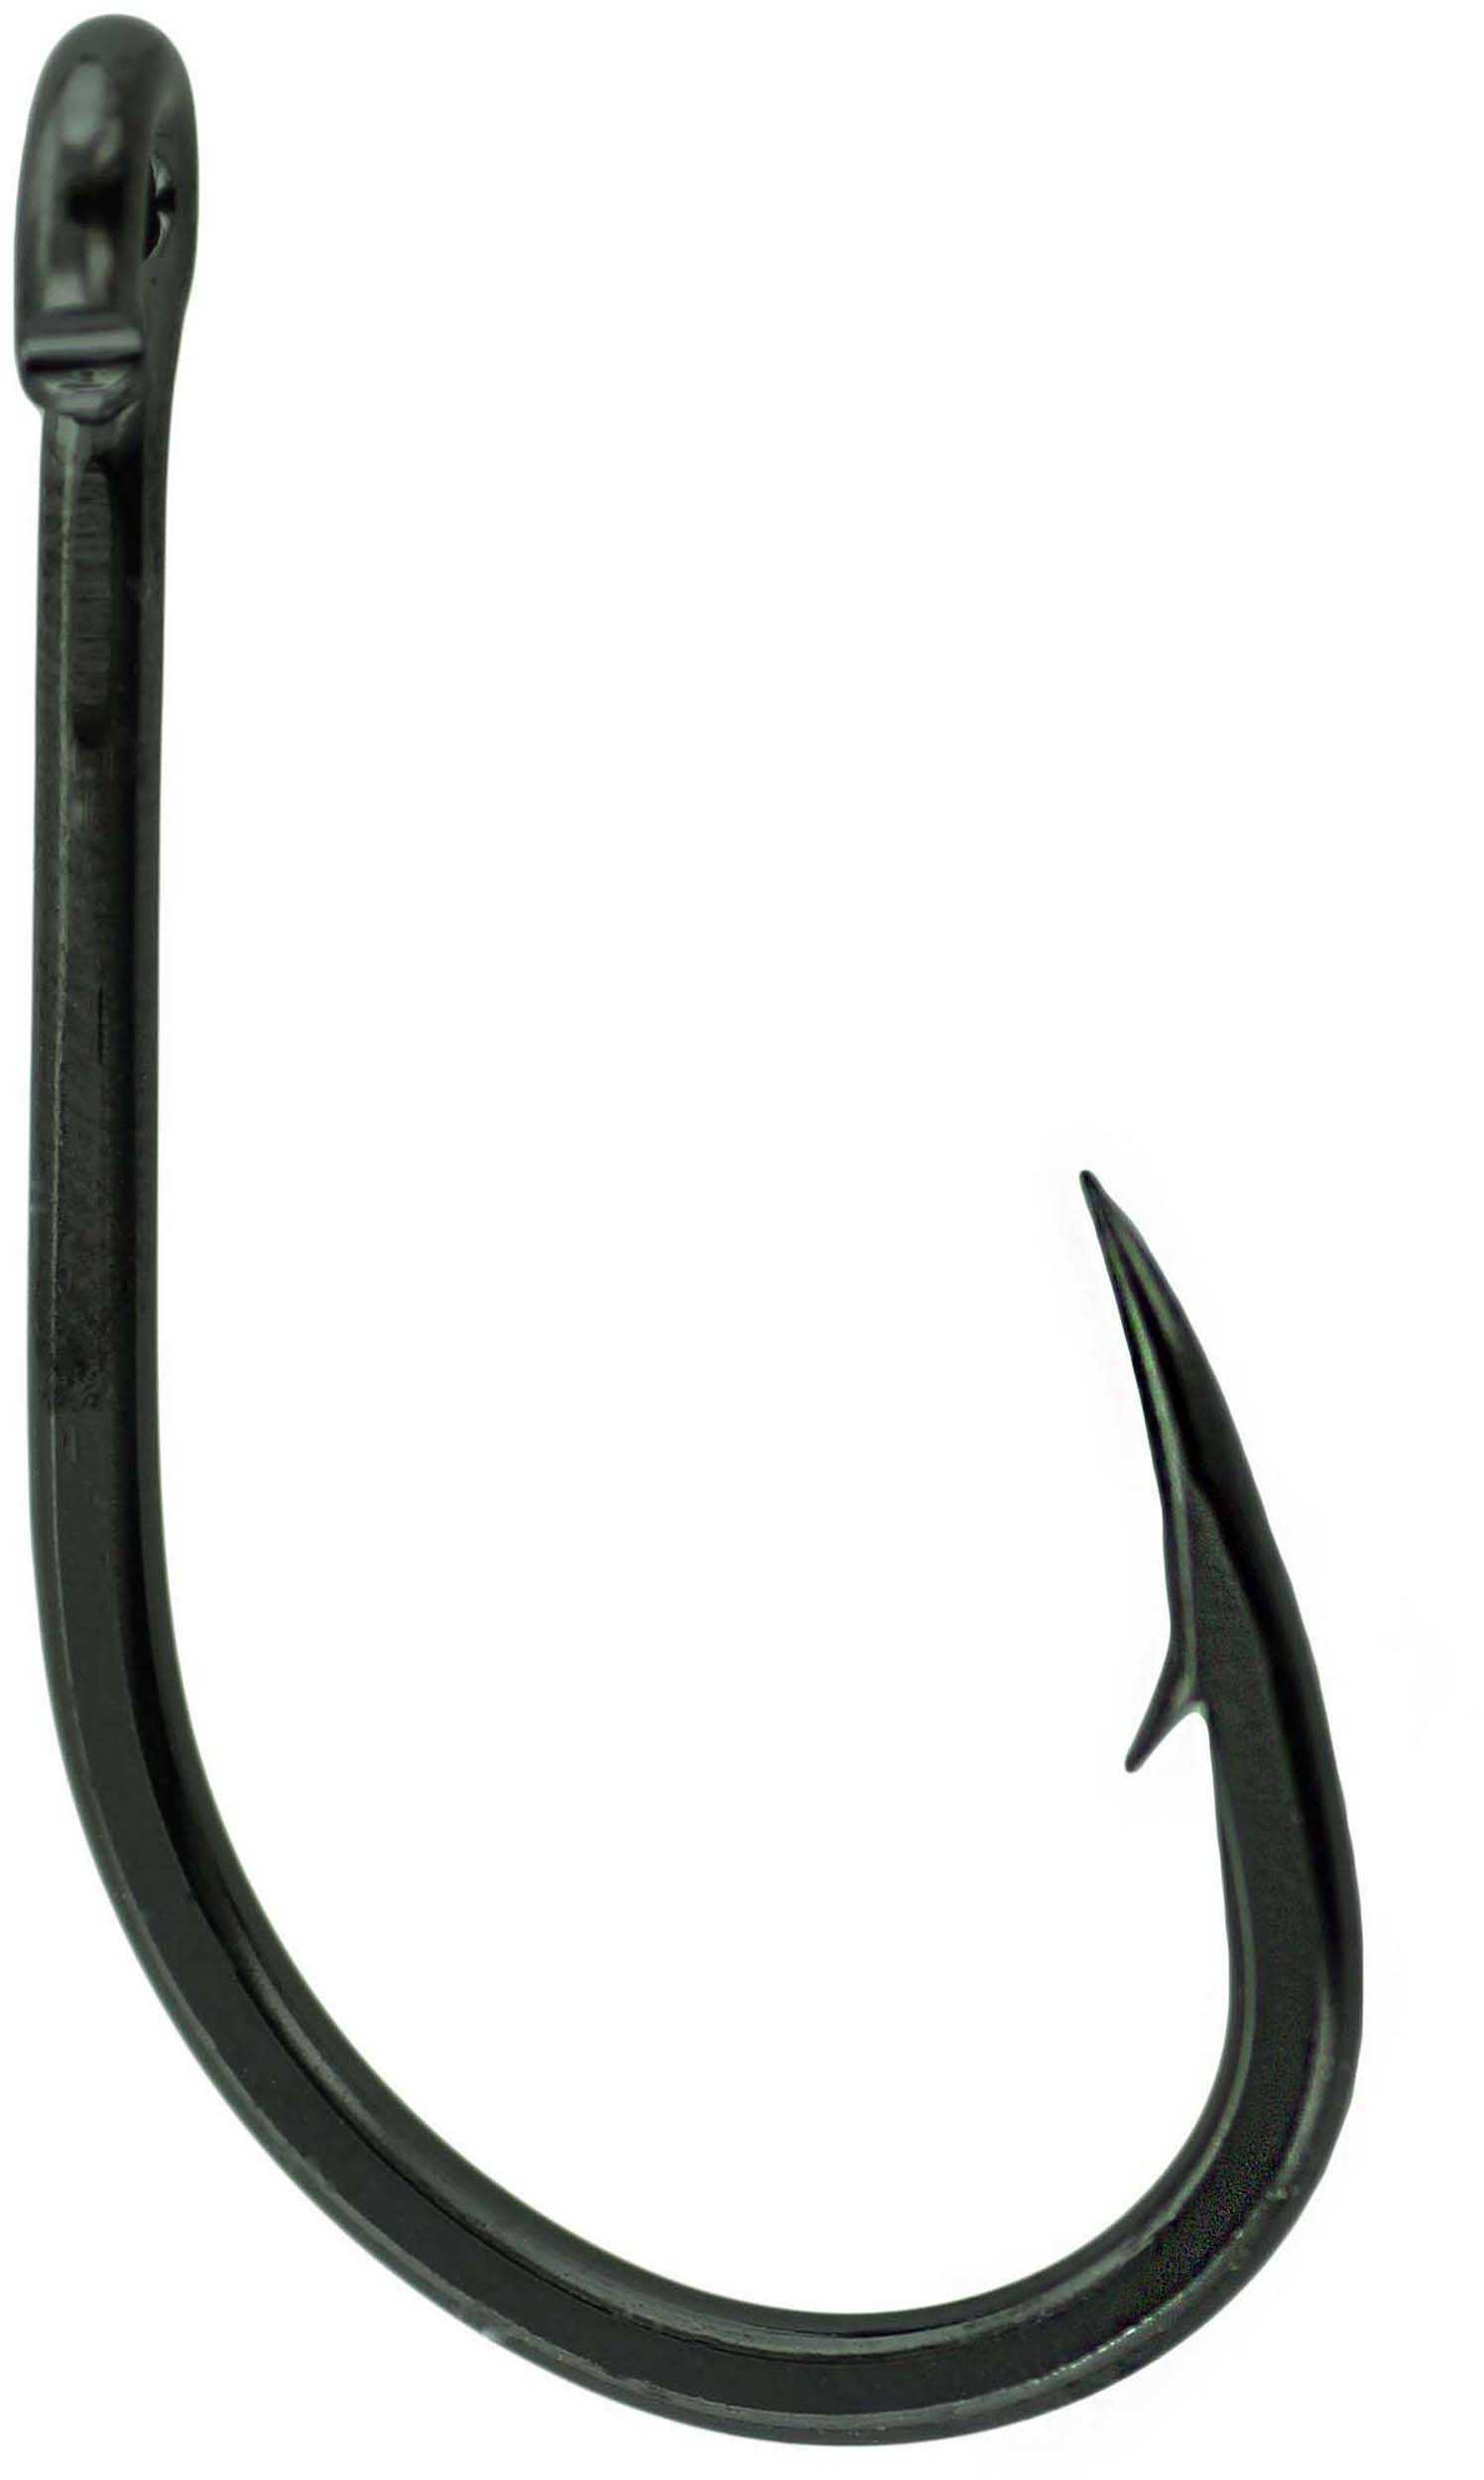 Gamakatsu Octopus Straight Eye 4X Strong Inline Point Hook, NS Black Size 5/0 Md: 263415